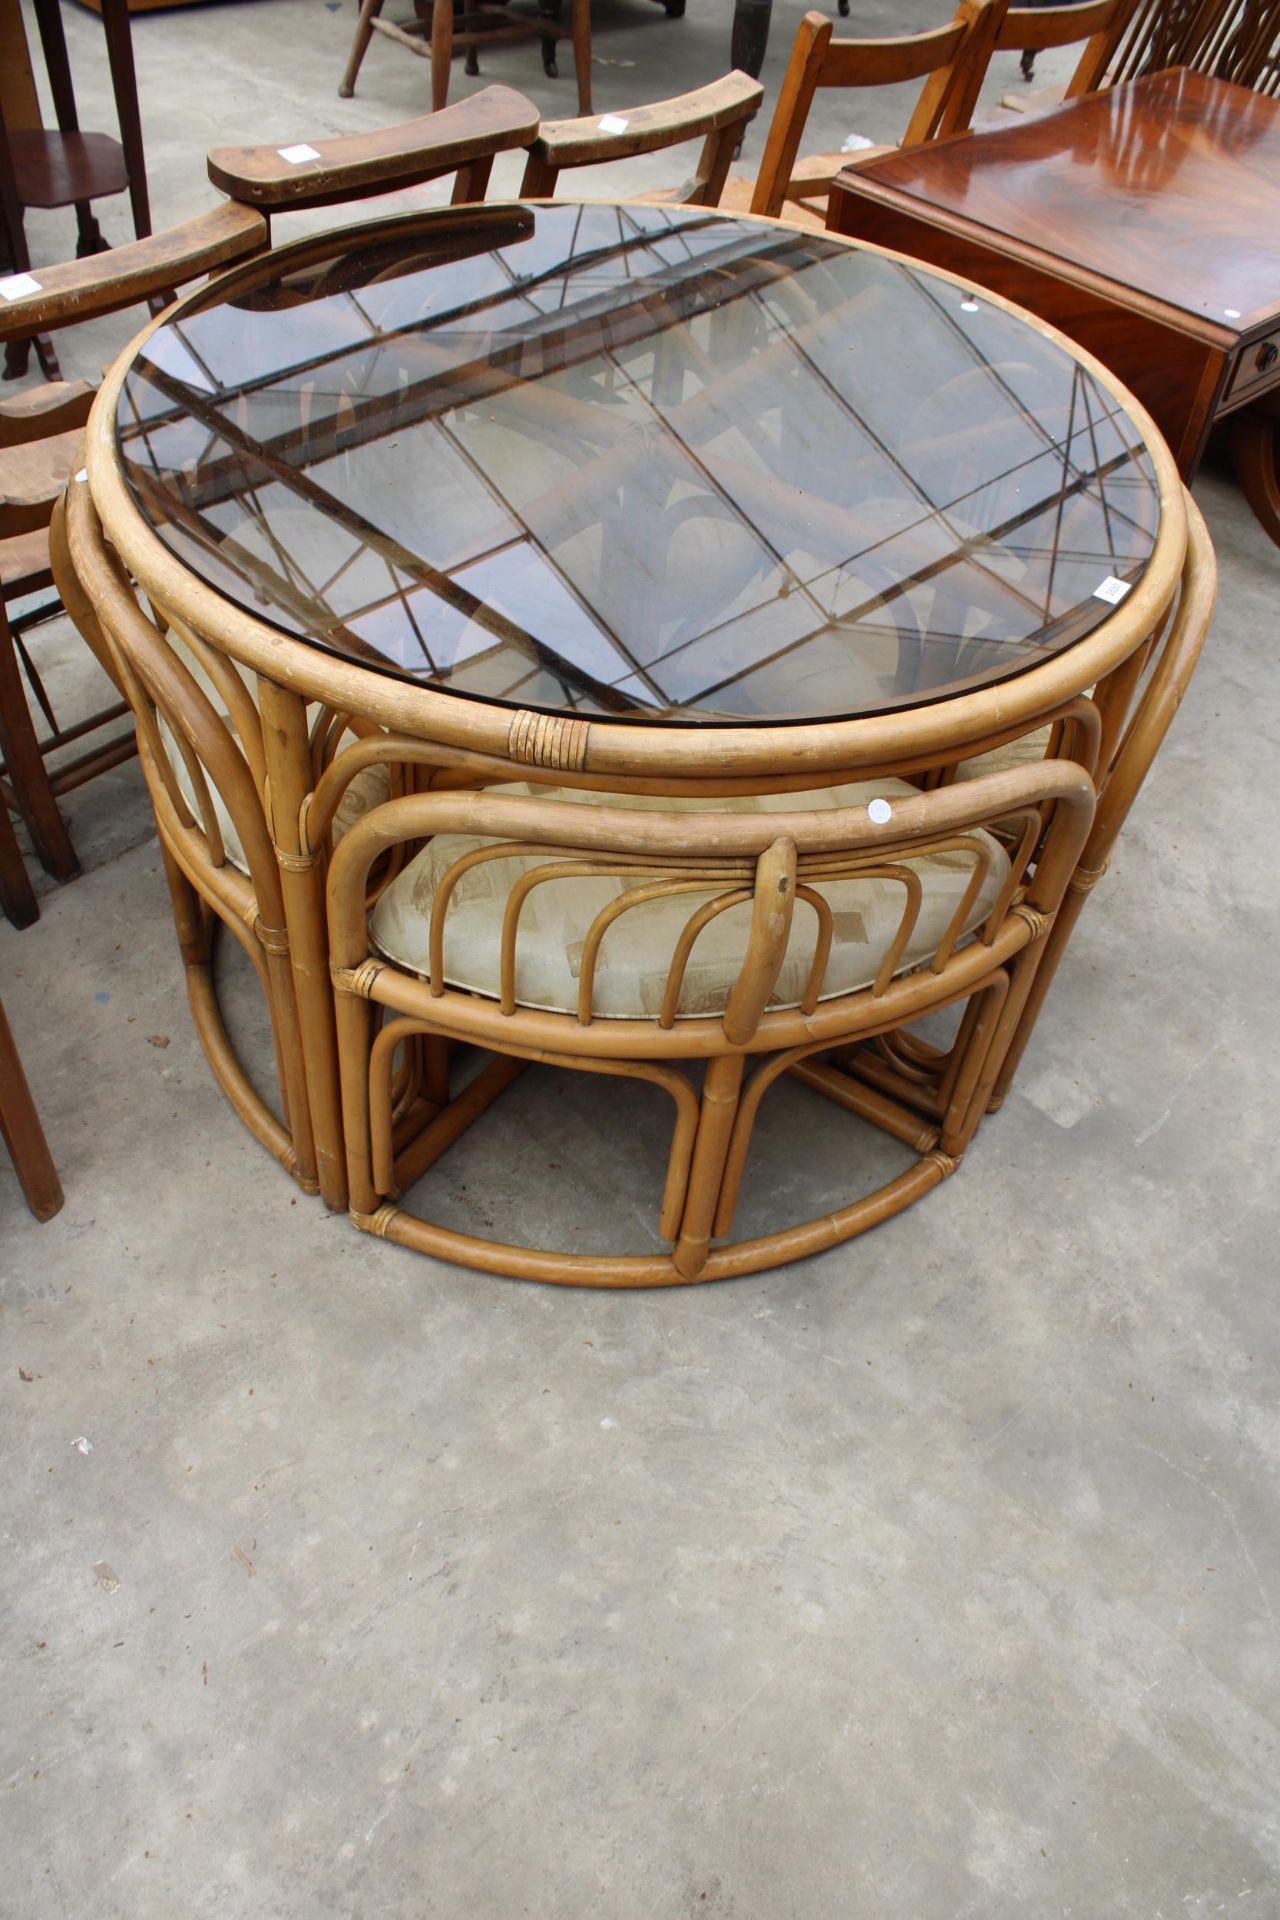 A MODERN 41" DIAMETER BAMBOO AND WICKER DINING TABLE WITH SMOKED GLASS TOP AND FOUR DINING CHAIRS